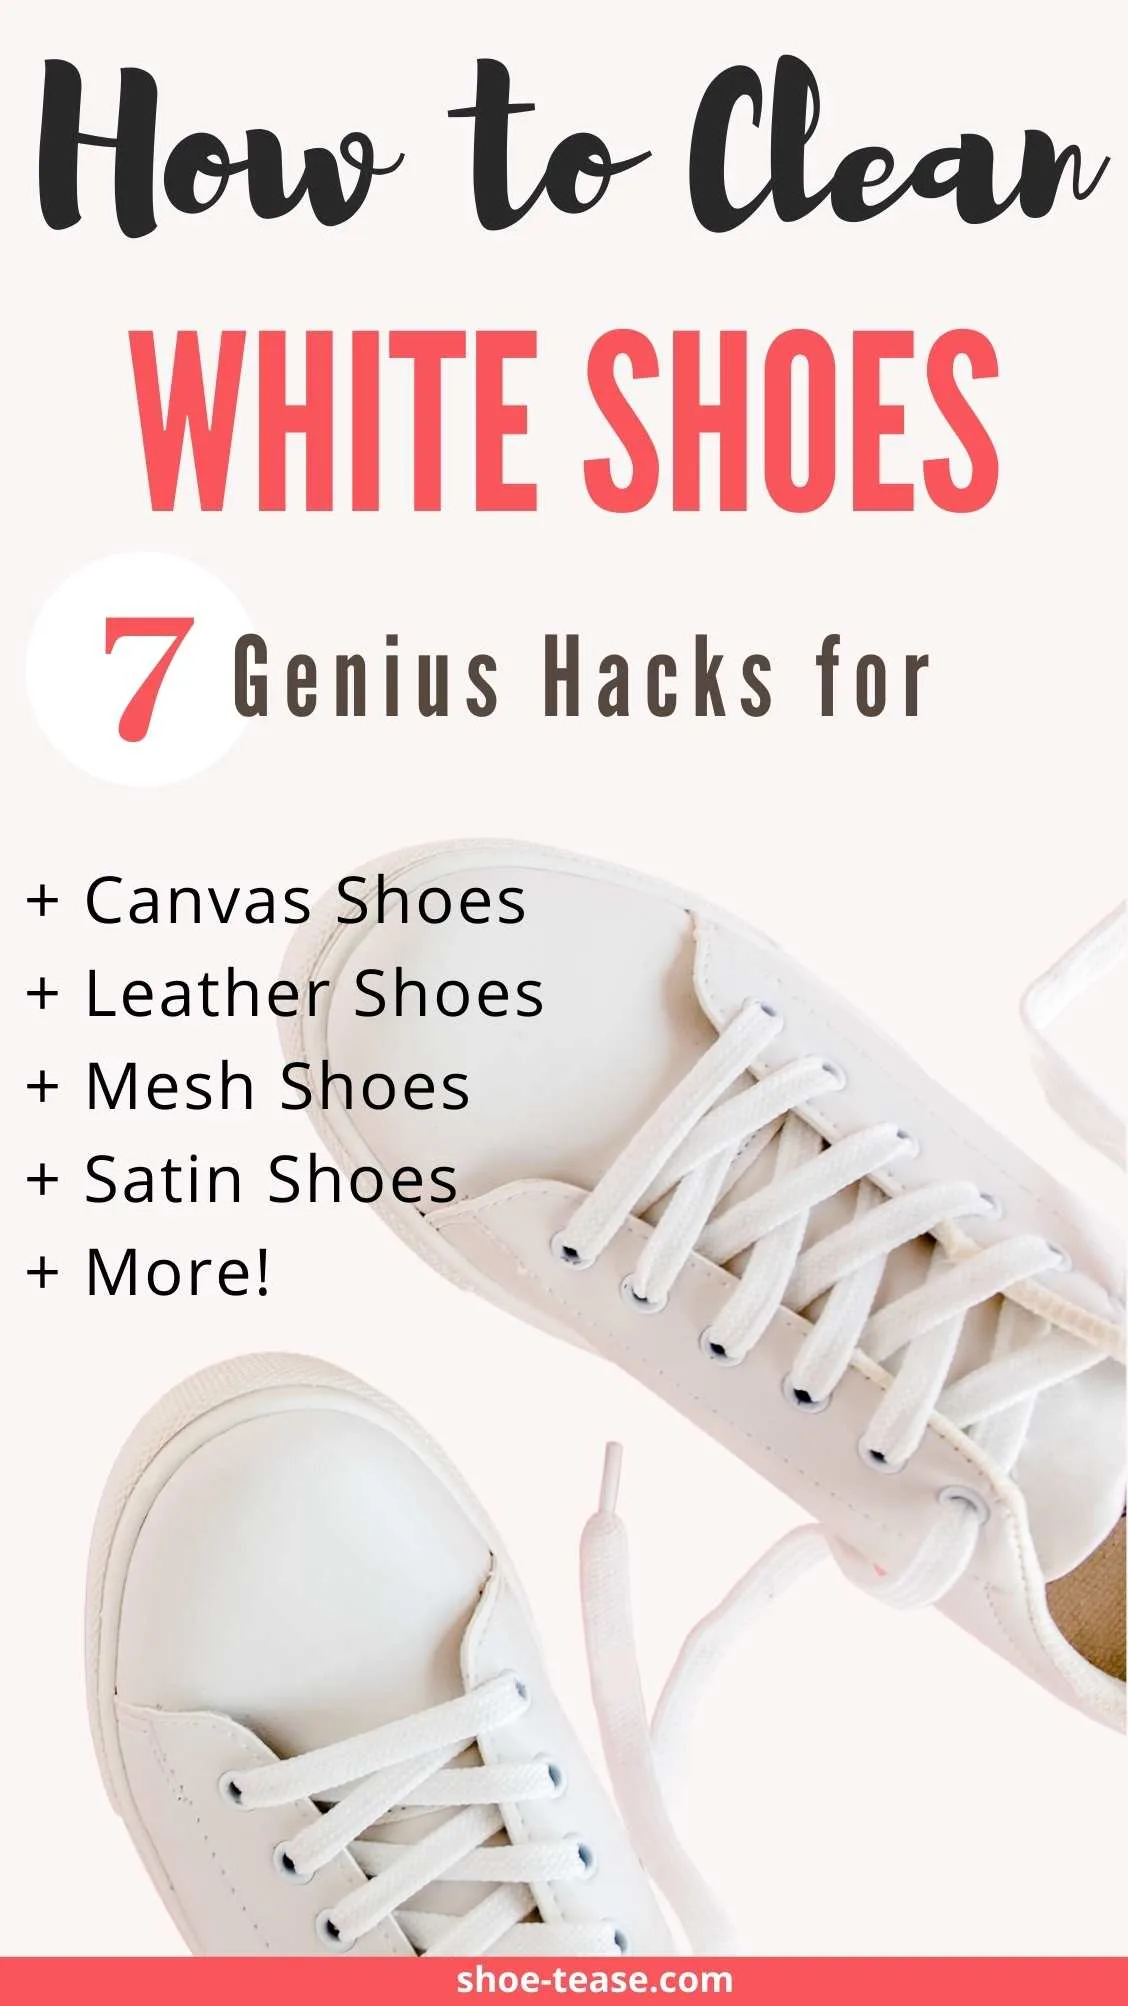 White Sneakers with text reading how to clean white shoes 6 genius hacks to make shoes white again.